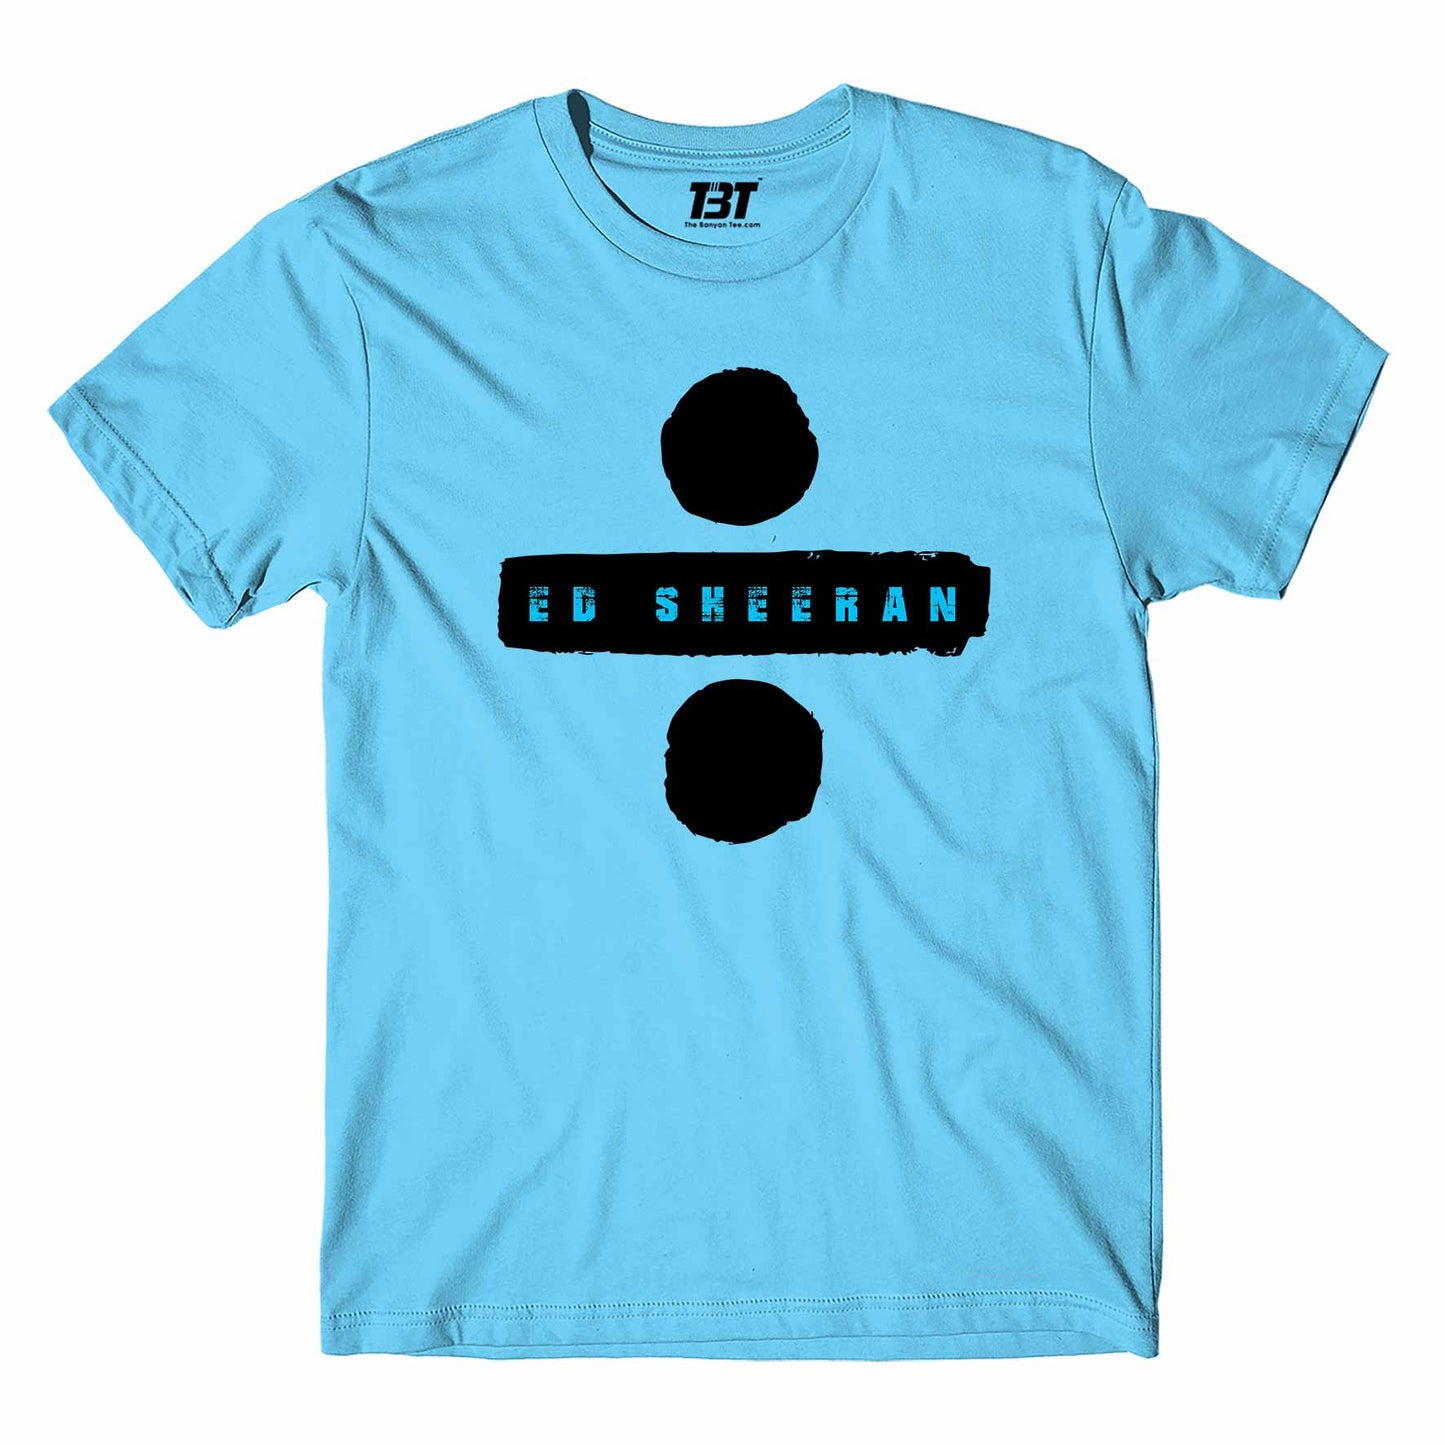 the banyan tee merch on sale Ed Sheeran T shirt - On Sale - 2XL (Chest size 46 IN)